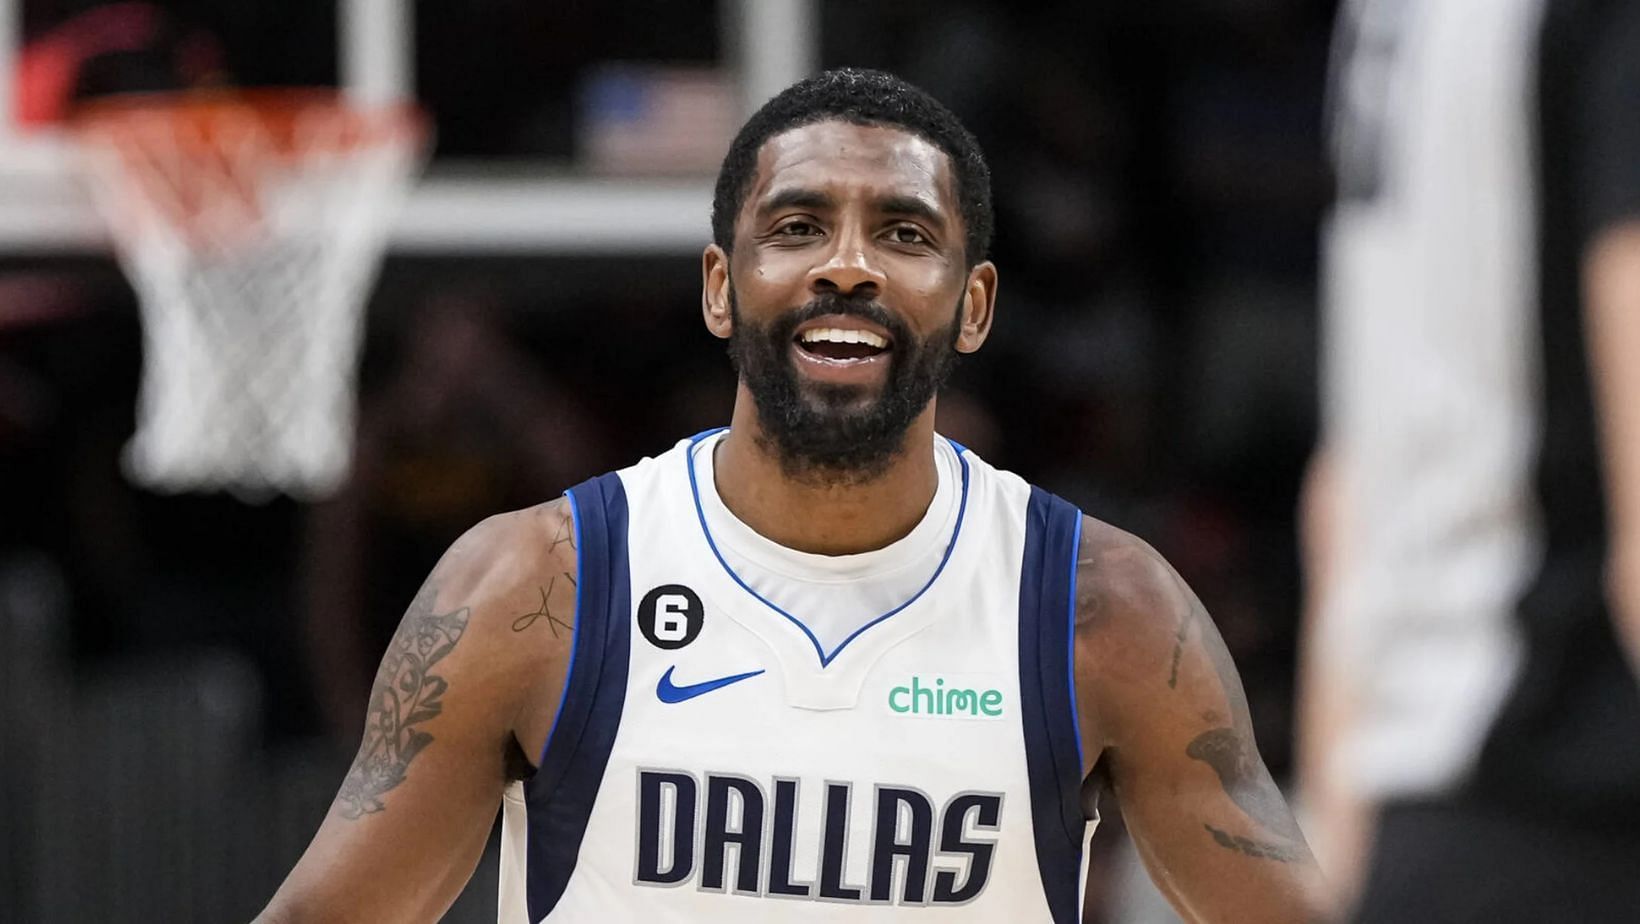 Kyrie Irving wants to play for one NBA team until he retires.